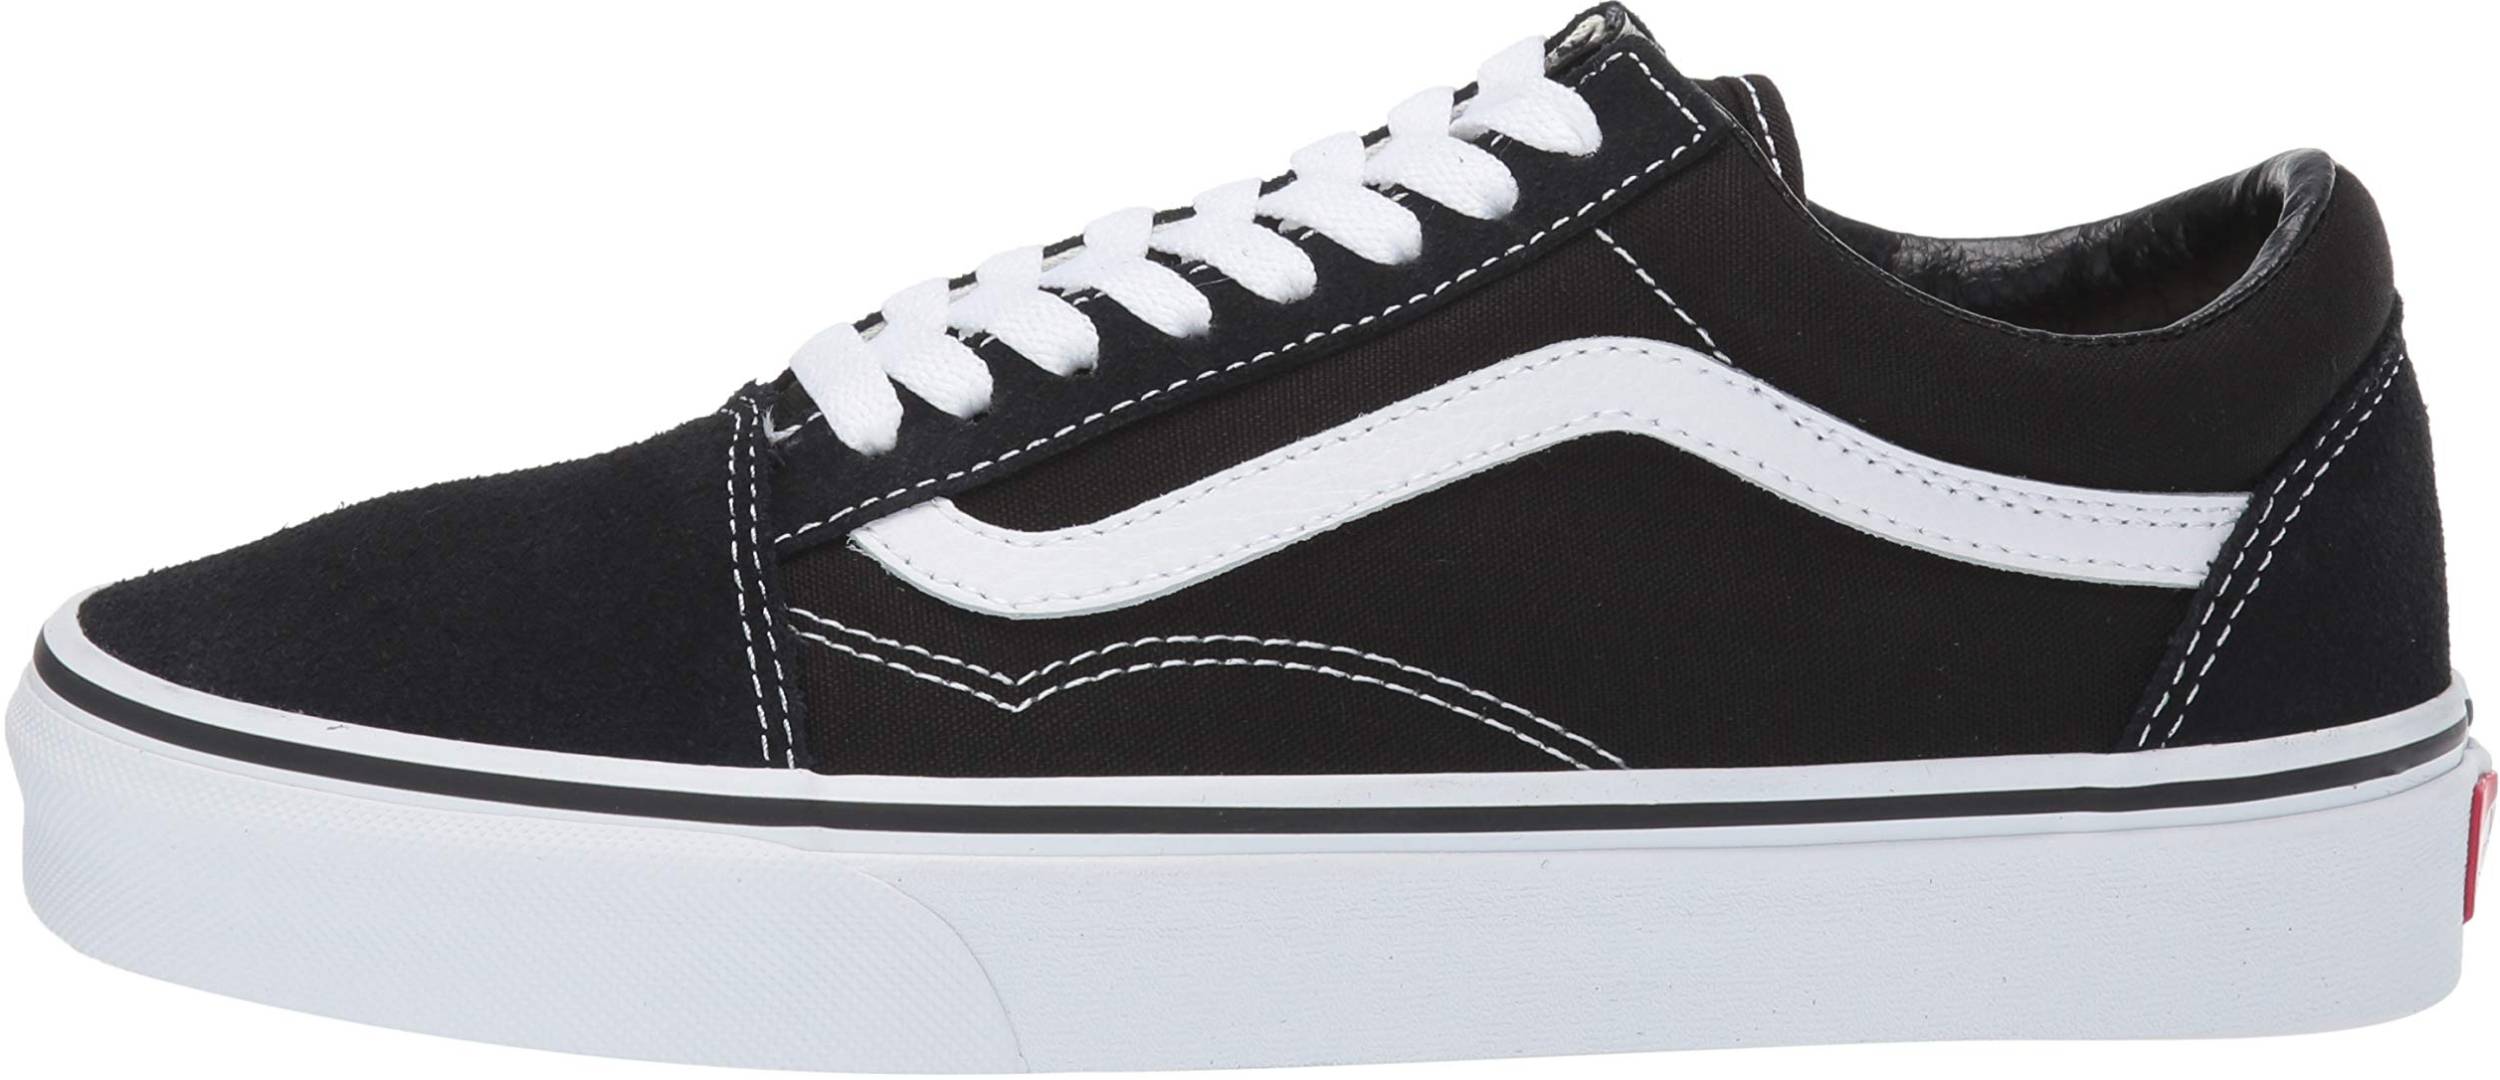 Save 46% on Cheap Sneakers (554 Models 